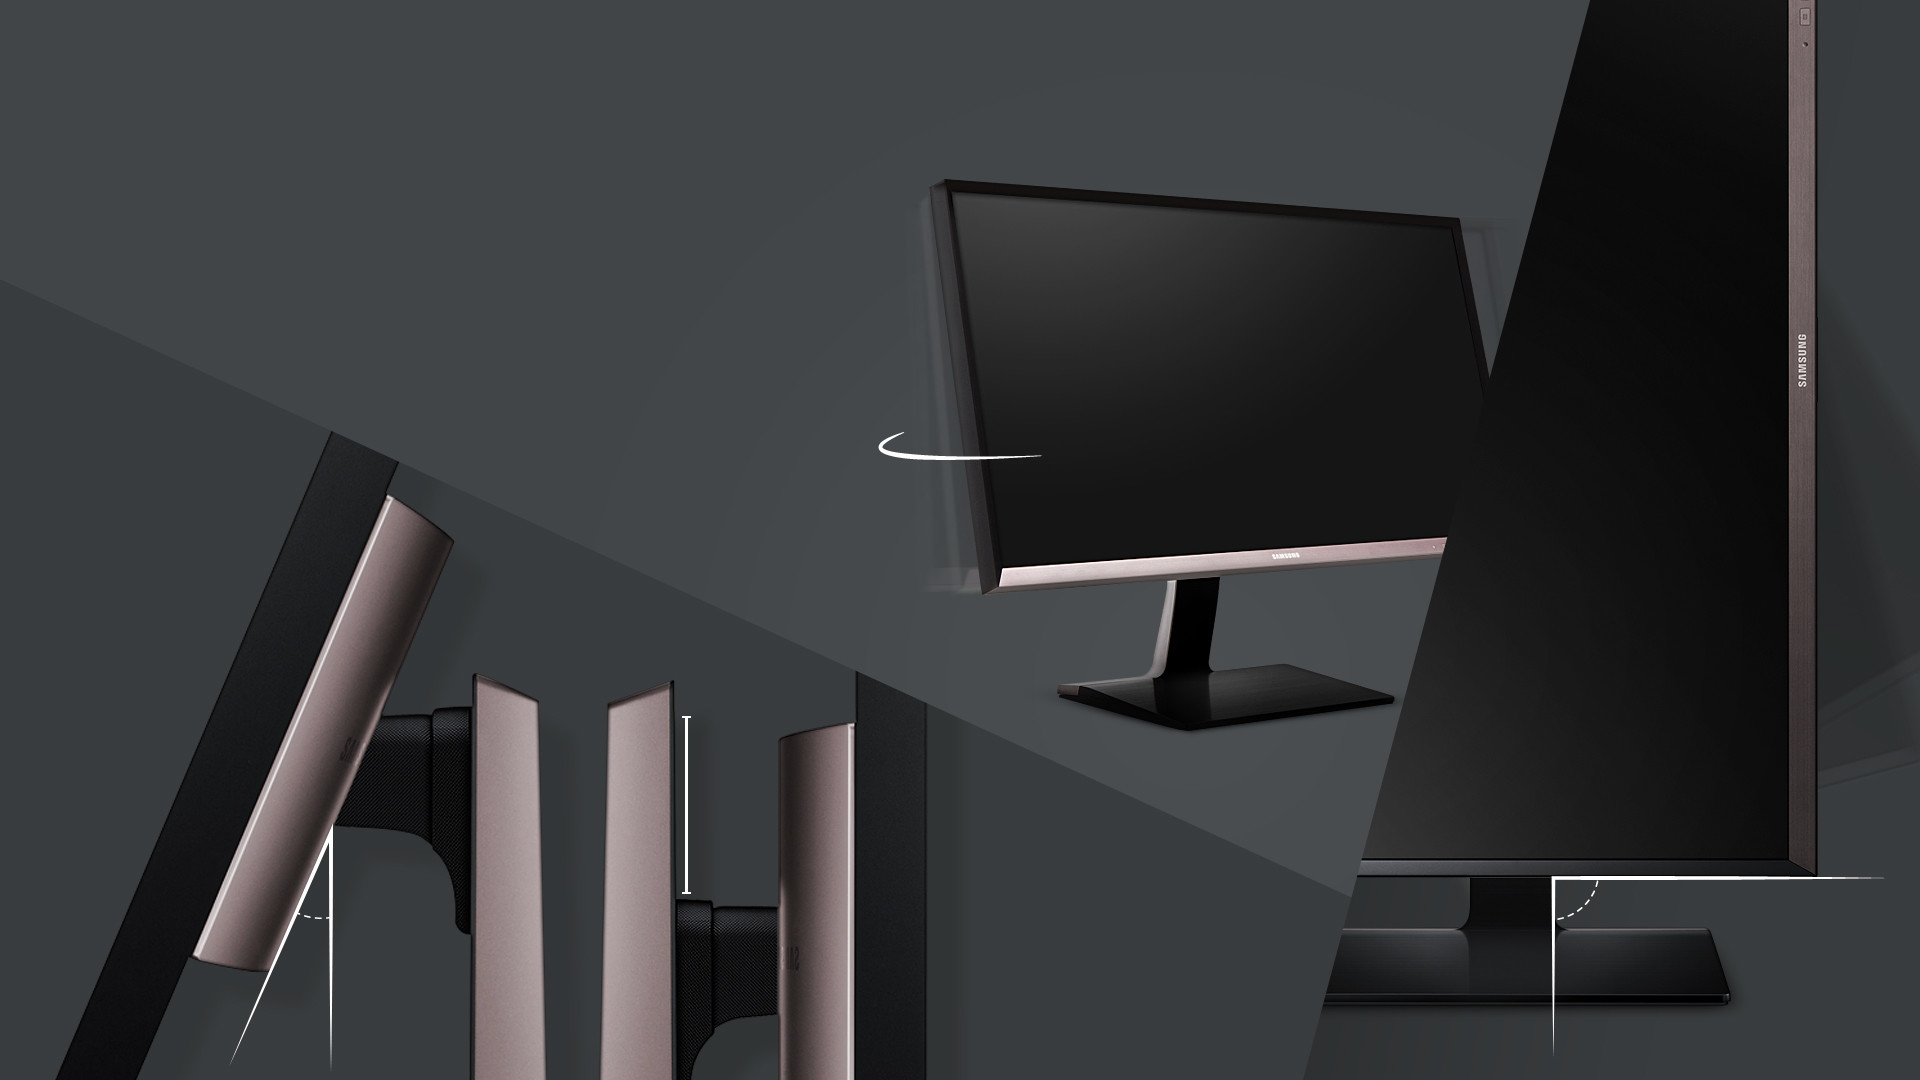 A professional ergonomic monitor for truly professional needs